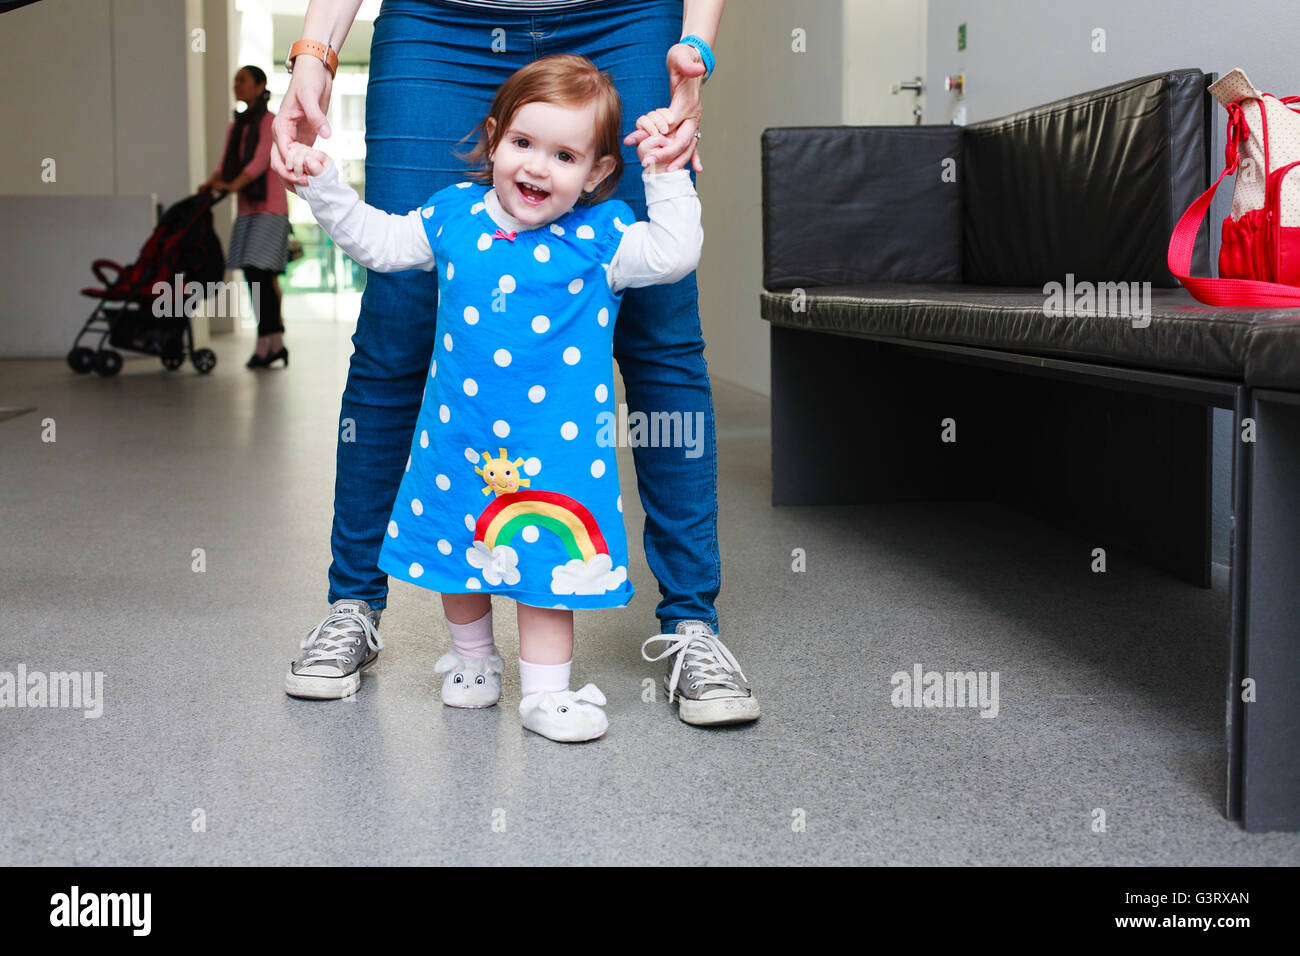 Toddler (girl) learning to walk Stock Photo